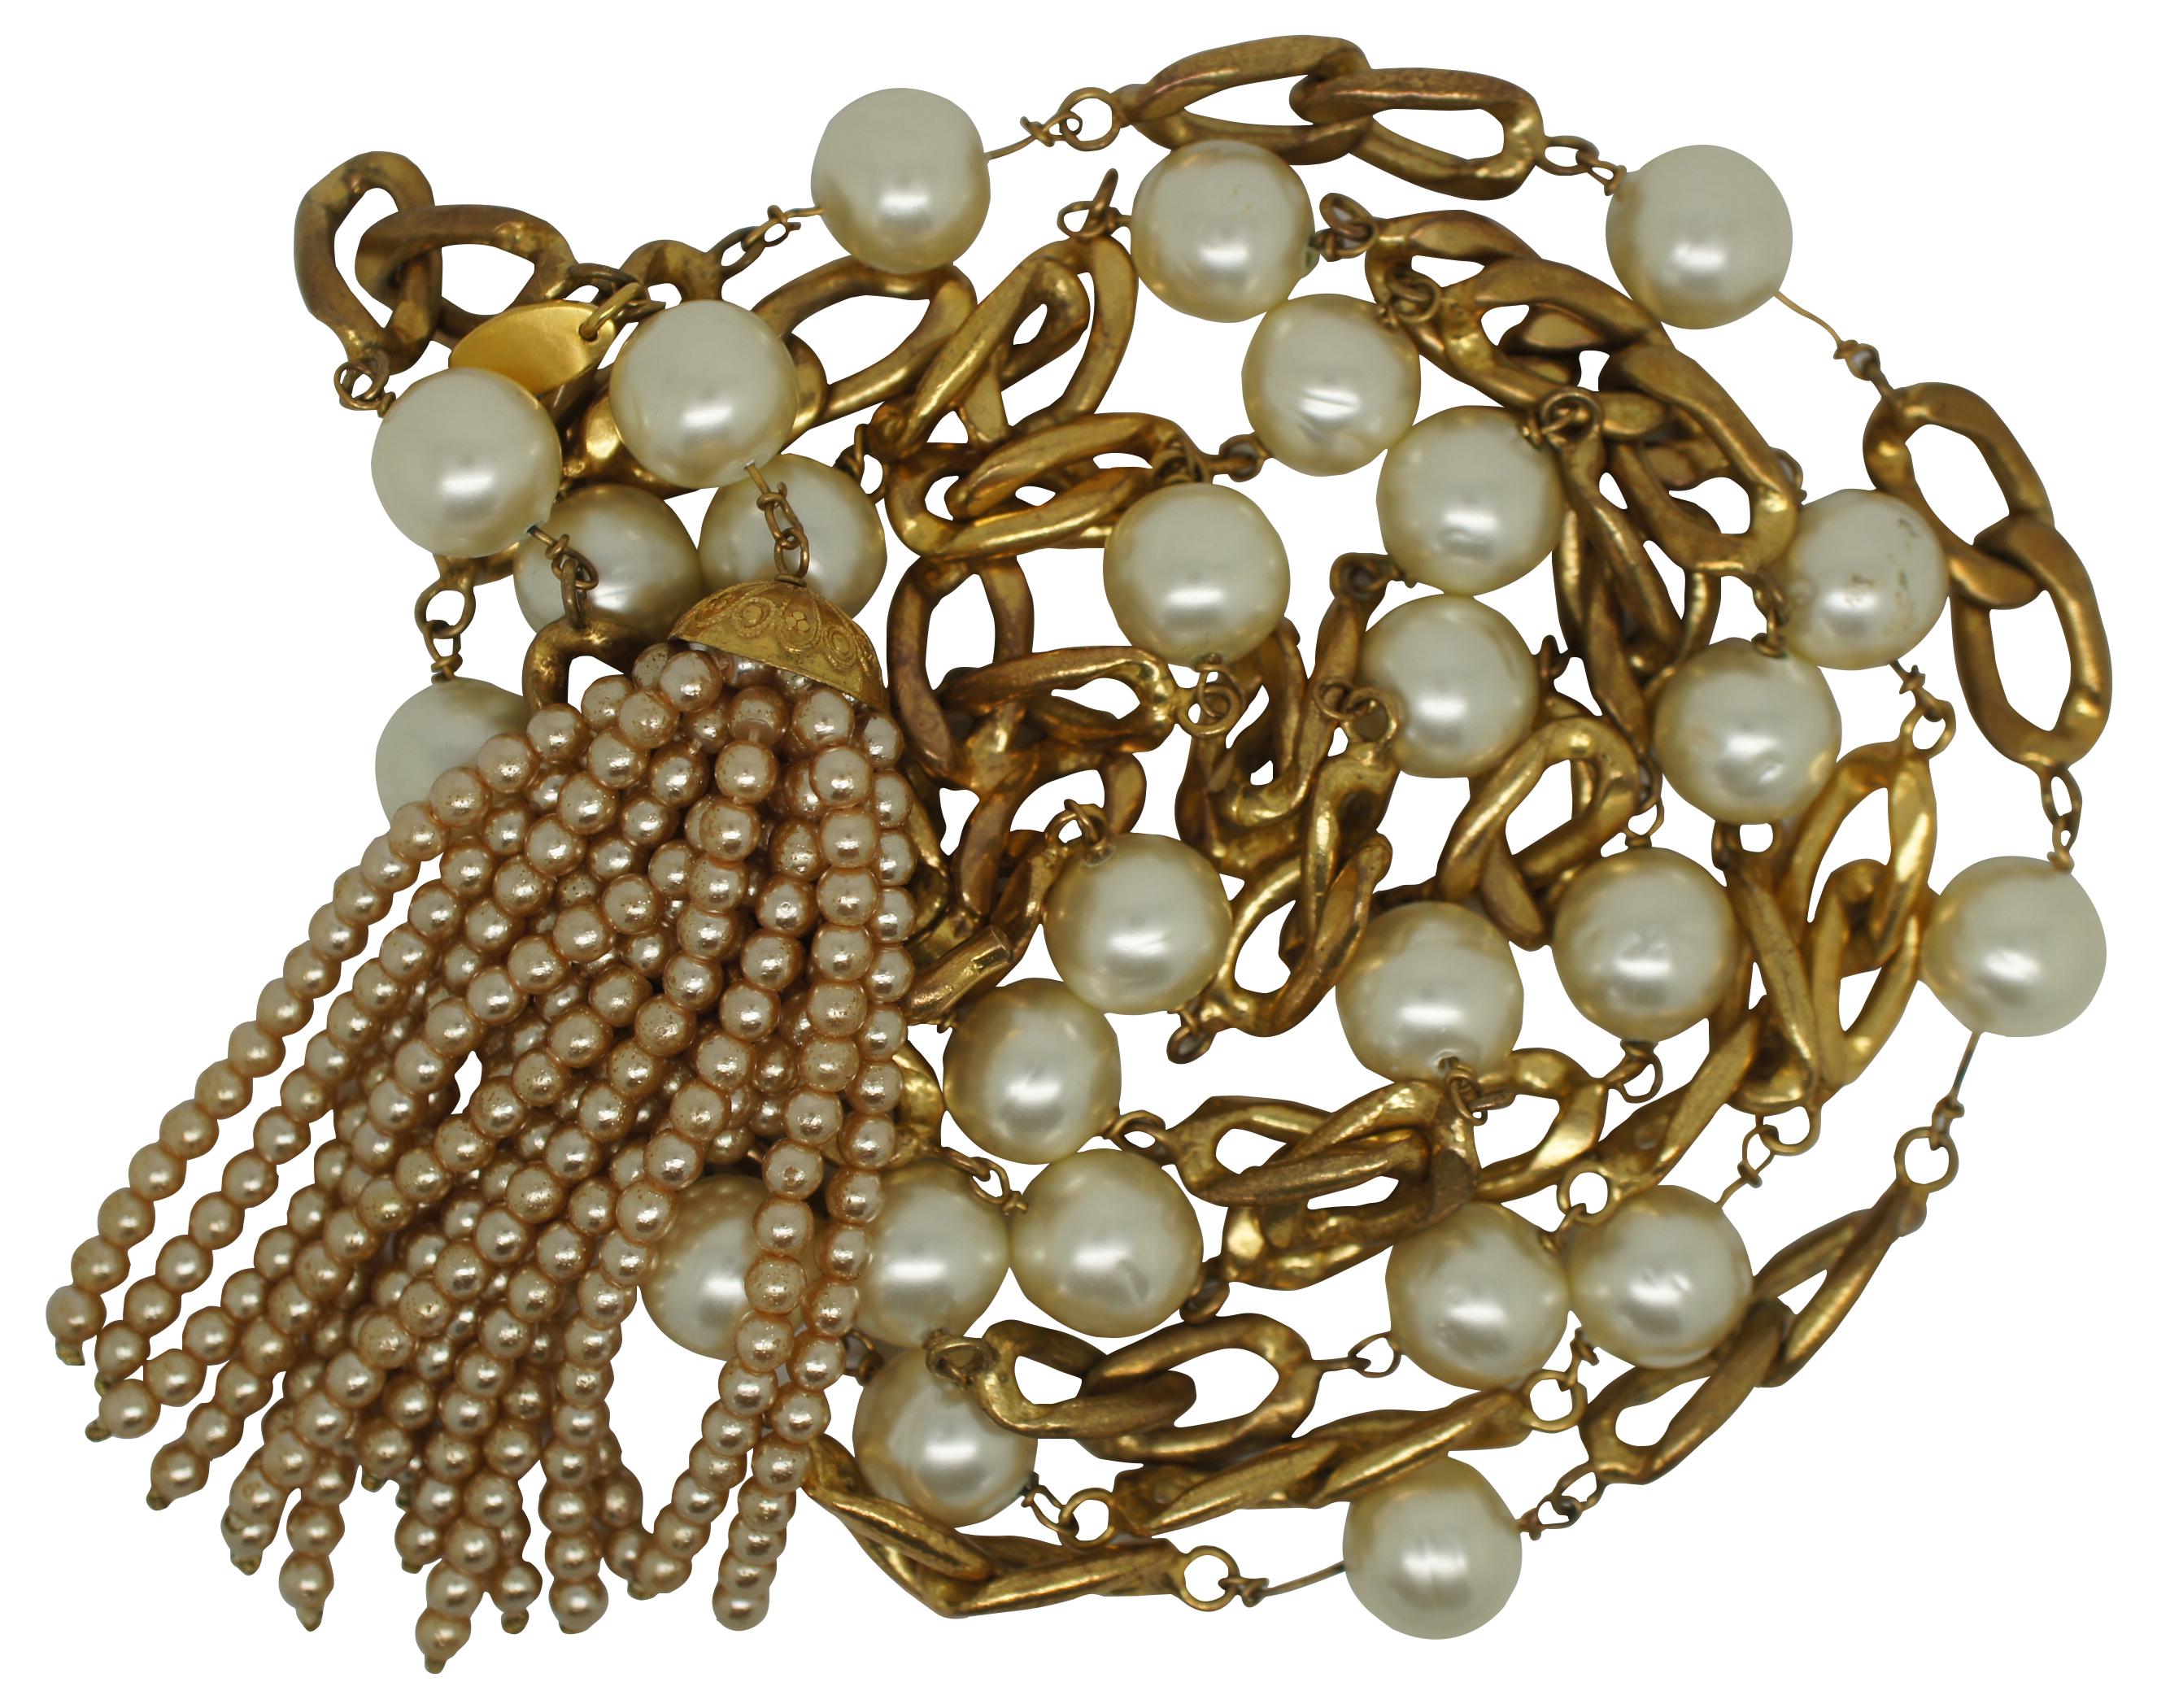 Circa 1988 Chanel gold toned chain link and alternating faux pearl swag belt. Features an eye catching tassel dangle with miniature pearls. Adjustable with hook closure. Collection 23 (1988)

Measures: 37” x 0.5” / Swag – 4.5” (Length x Width).